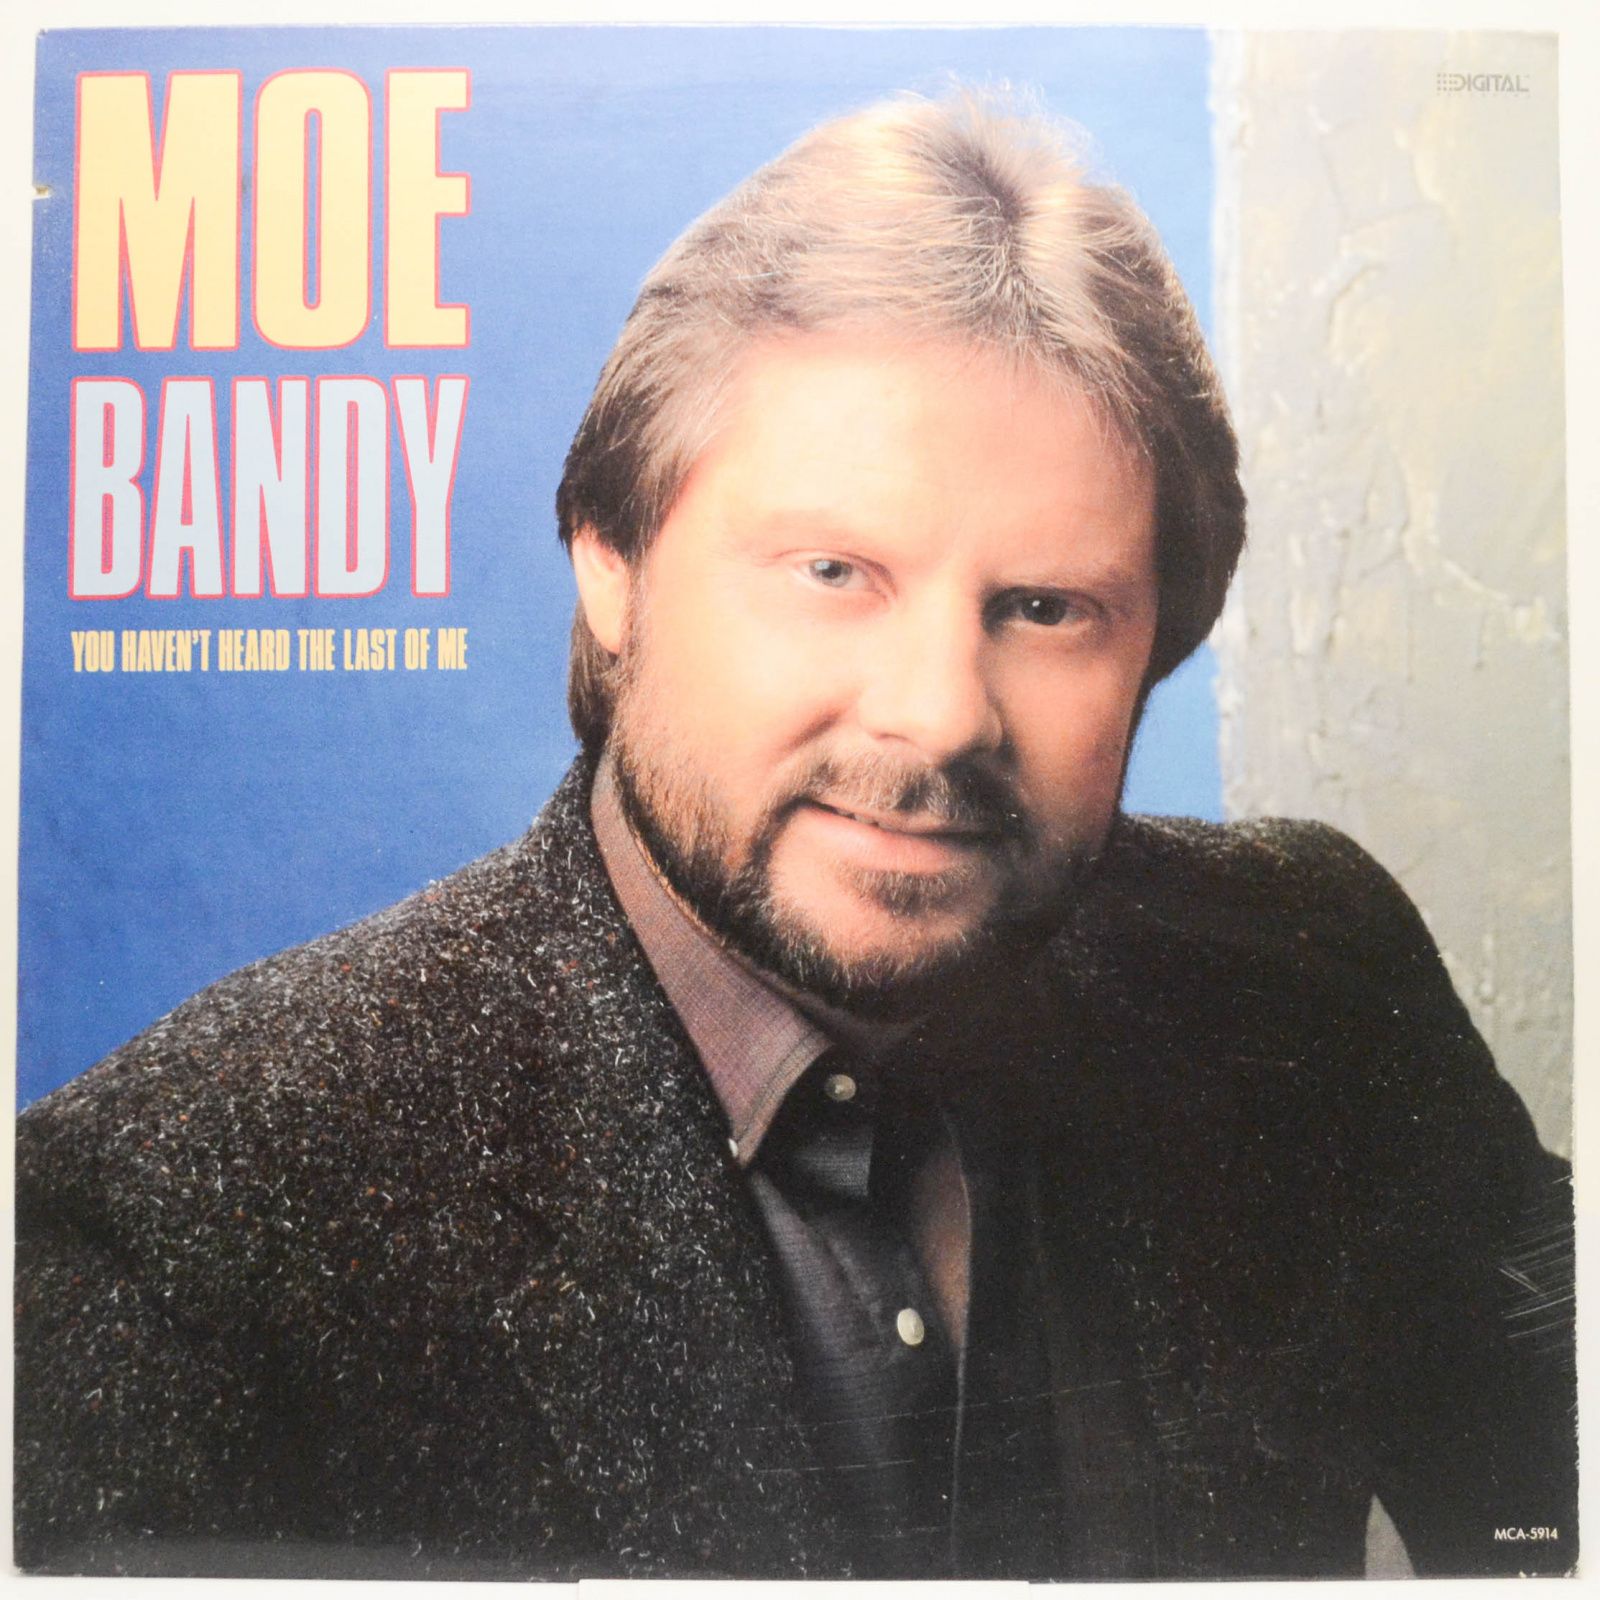 Moe Bandy — You Haven't Heard The Last Of Me, 1987